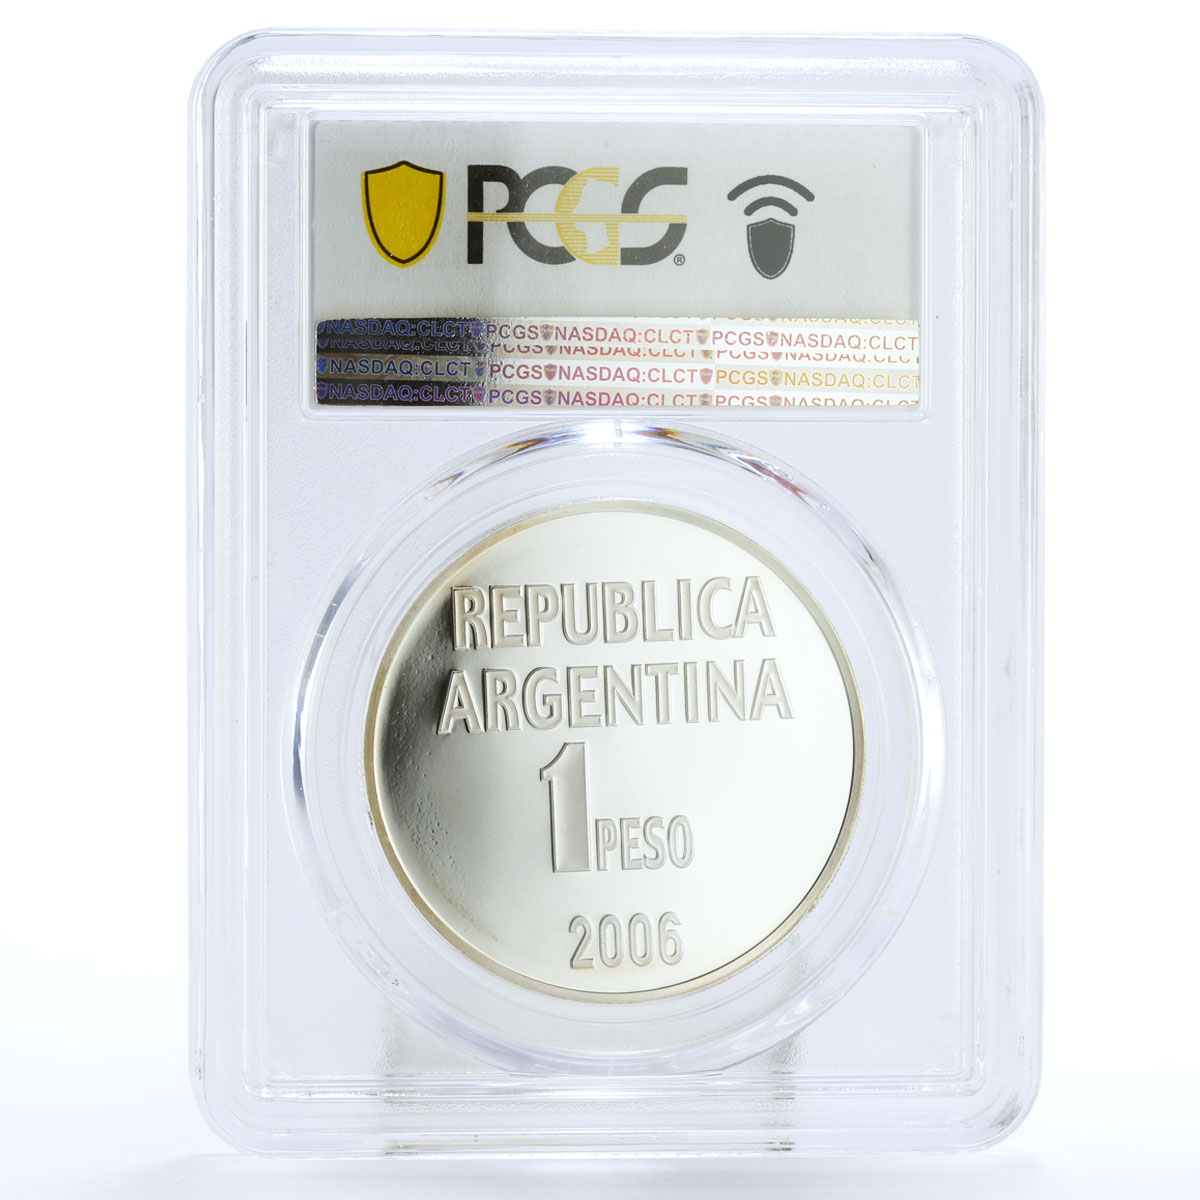 Argentina 1 pesos Defence of Human Rights PR67 PCGS silver coin 2006